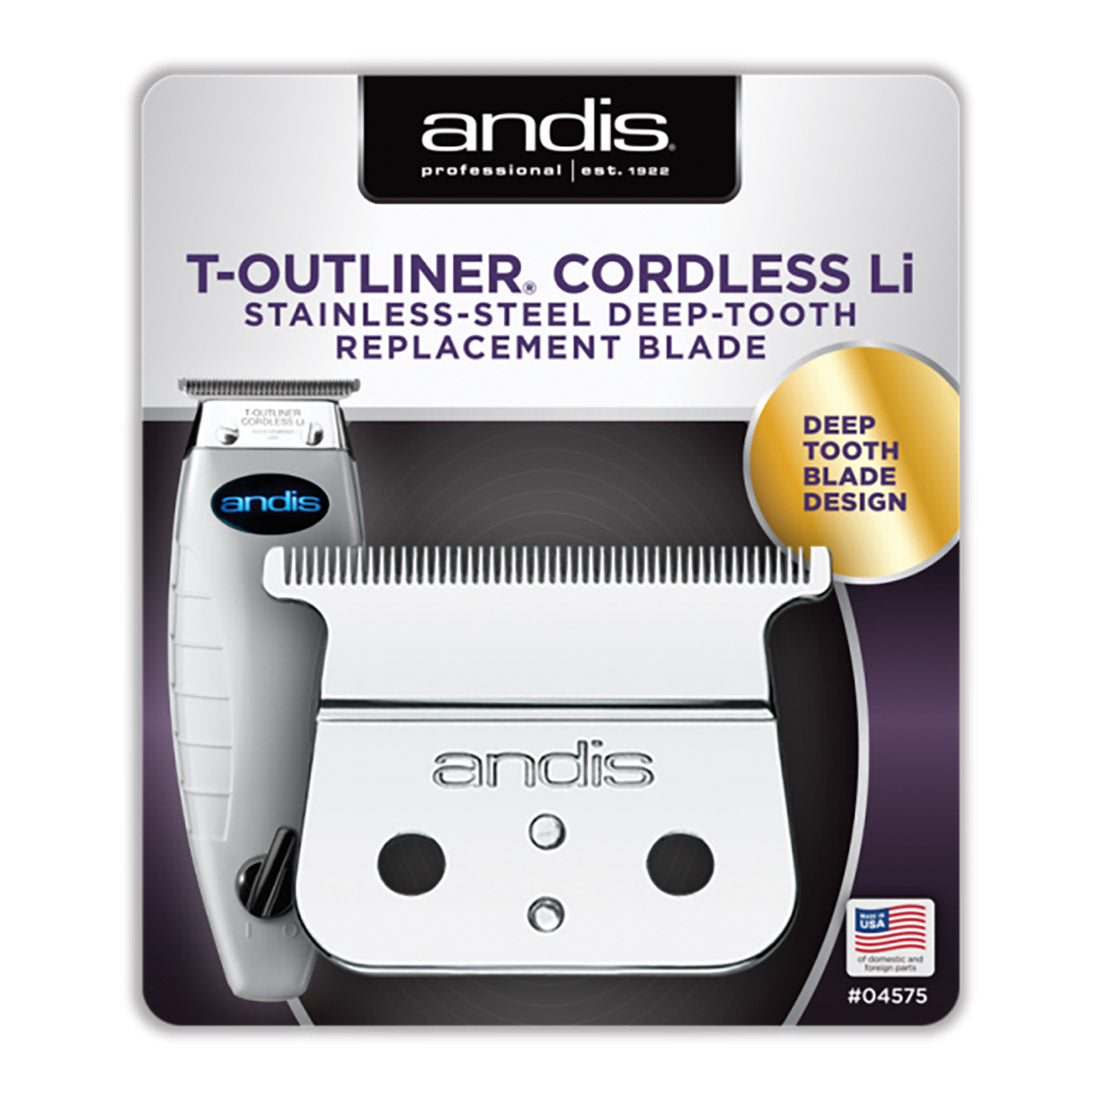 Andis T-Outliner GTX Cordless Li Replacement Blade #04575